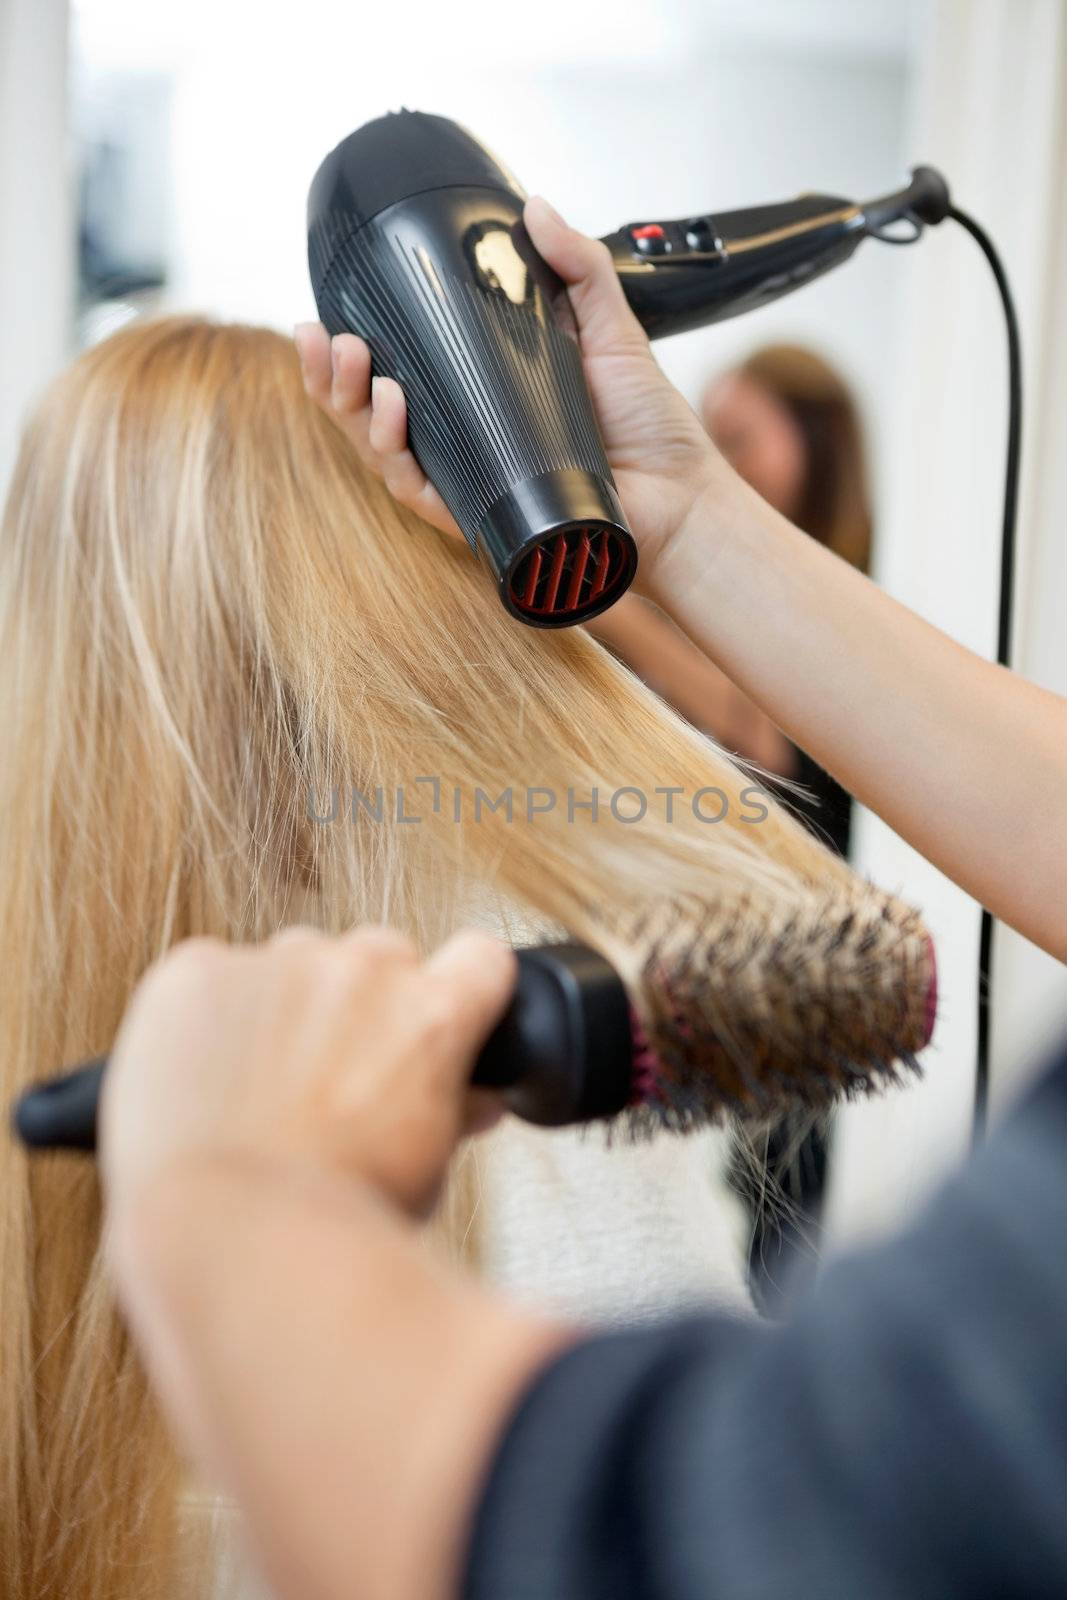 Close up of hairdressers hands drying long blond hair with blow dryer and round brush